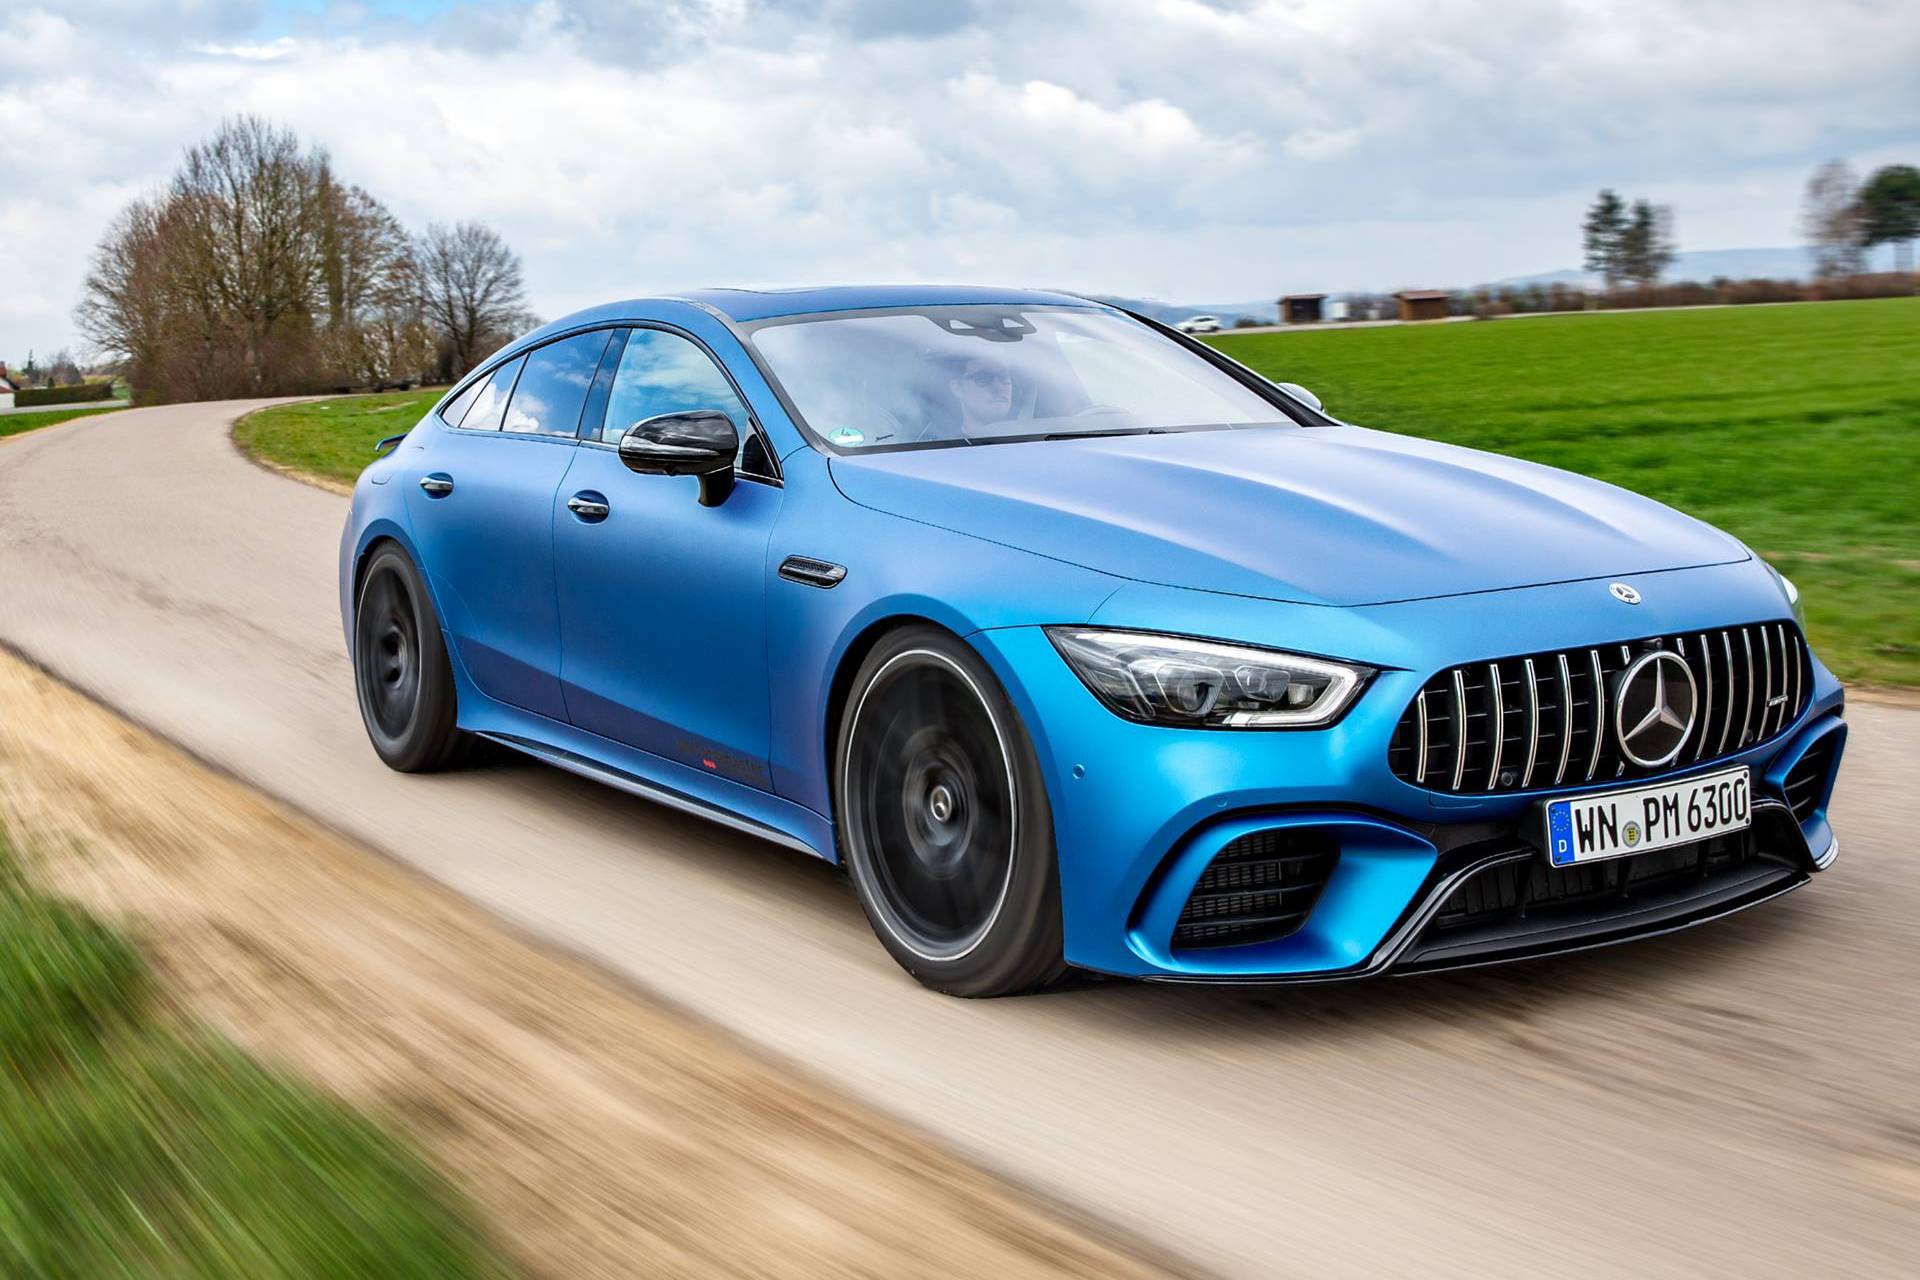 Performmaster Mercedes Amg Gt 63 S 4 Door Coupe Packs 730 Hp 544 Kw